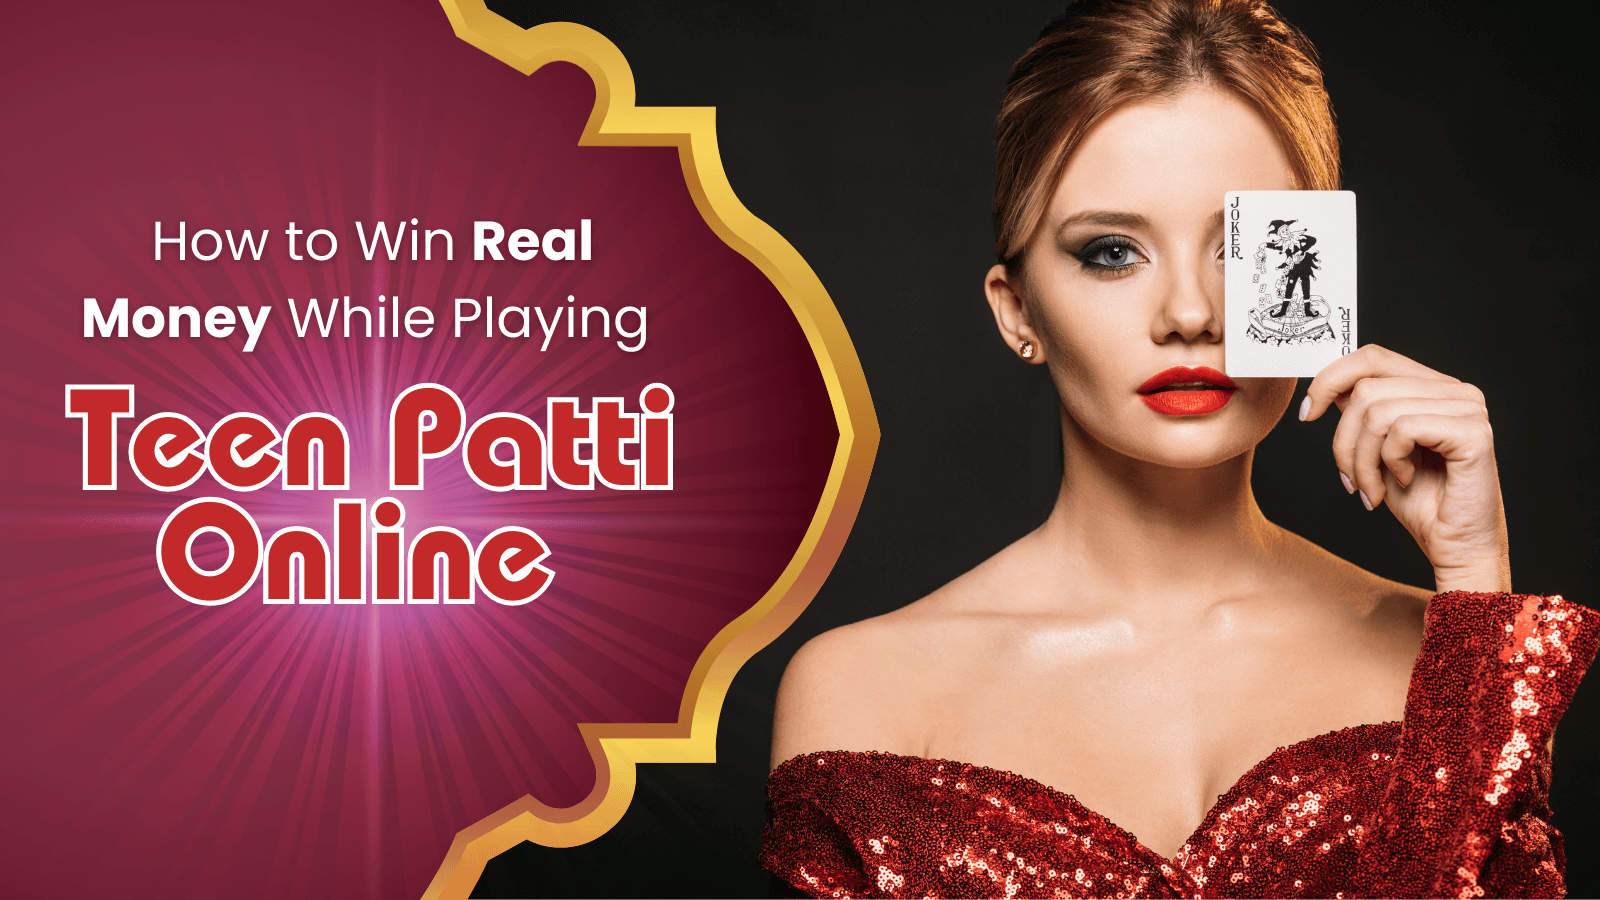 How to Win Real Money While Playing Teen Patti Online